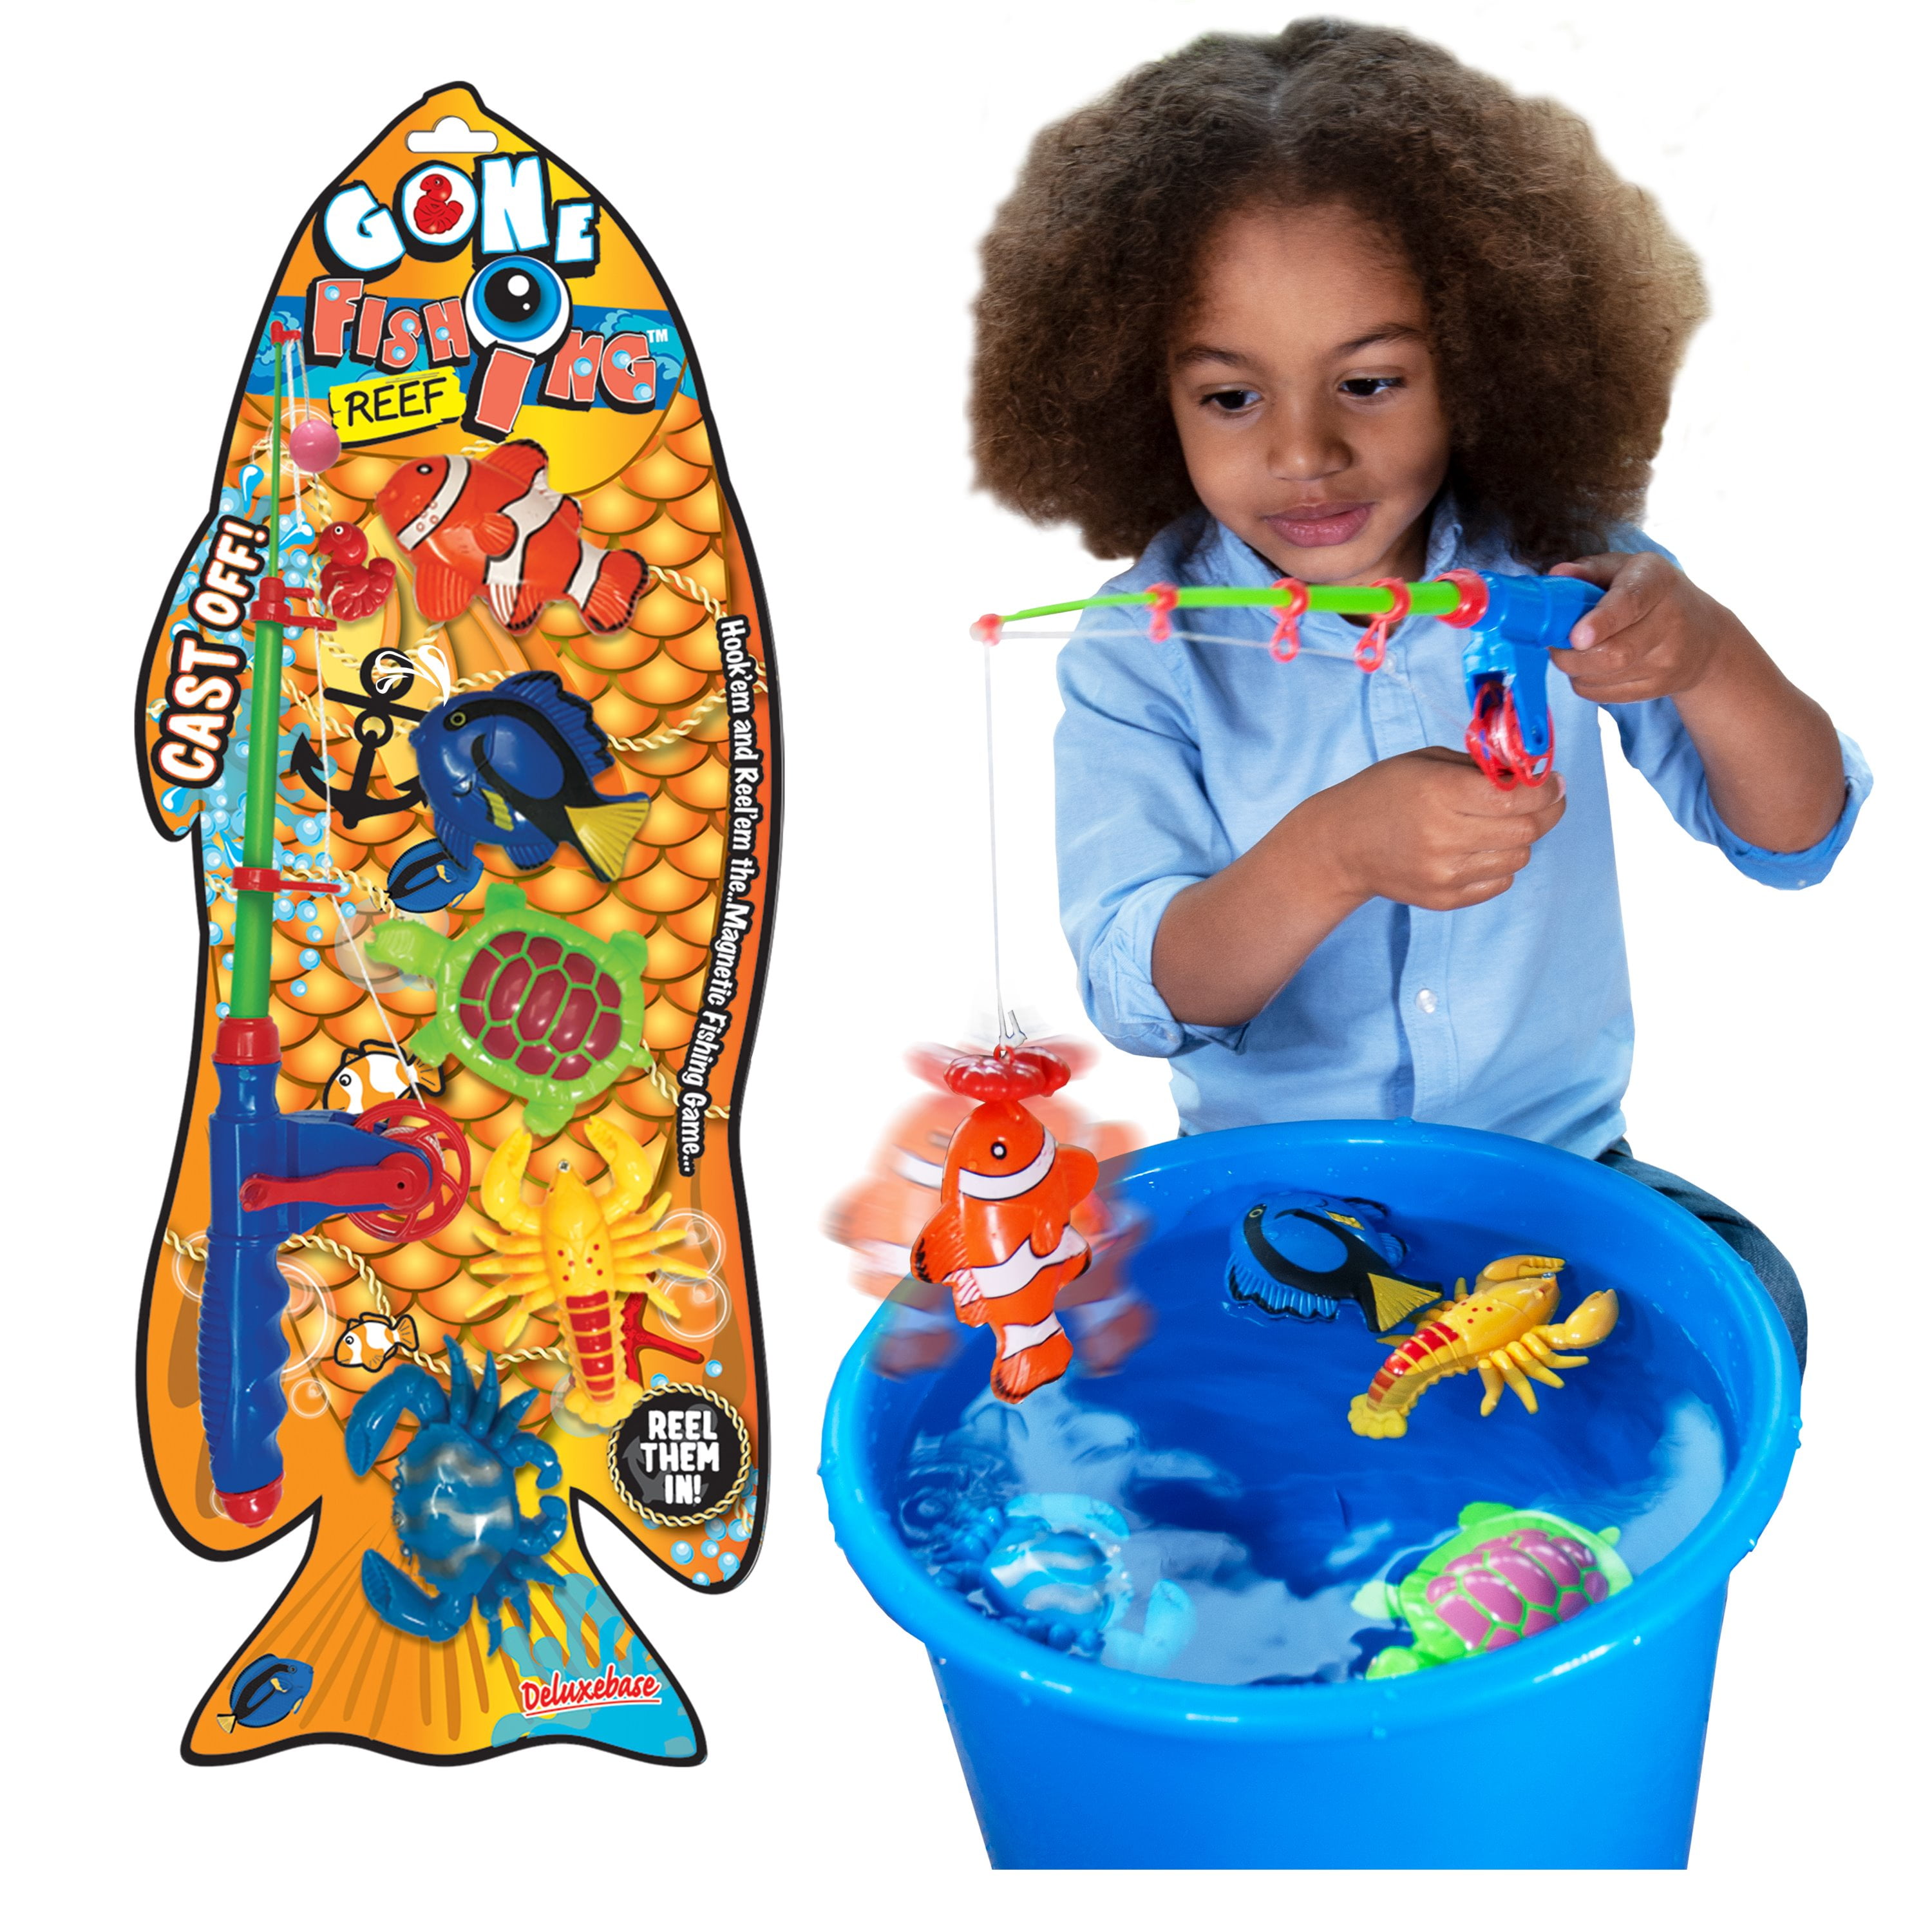 Liberty Imports Rod and Reel Fishing Game Bath Toy Set for Kids